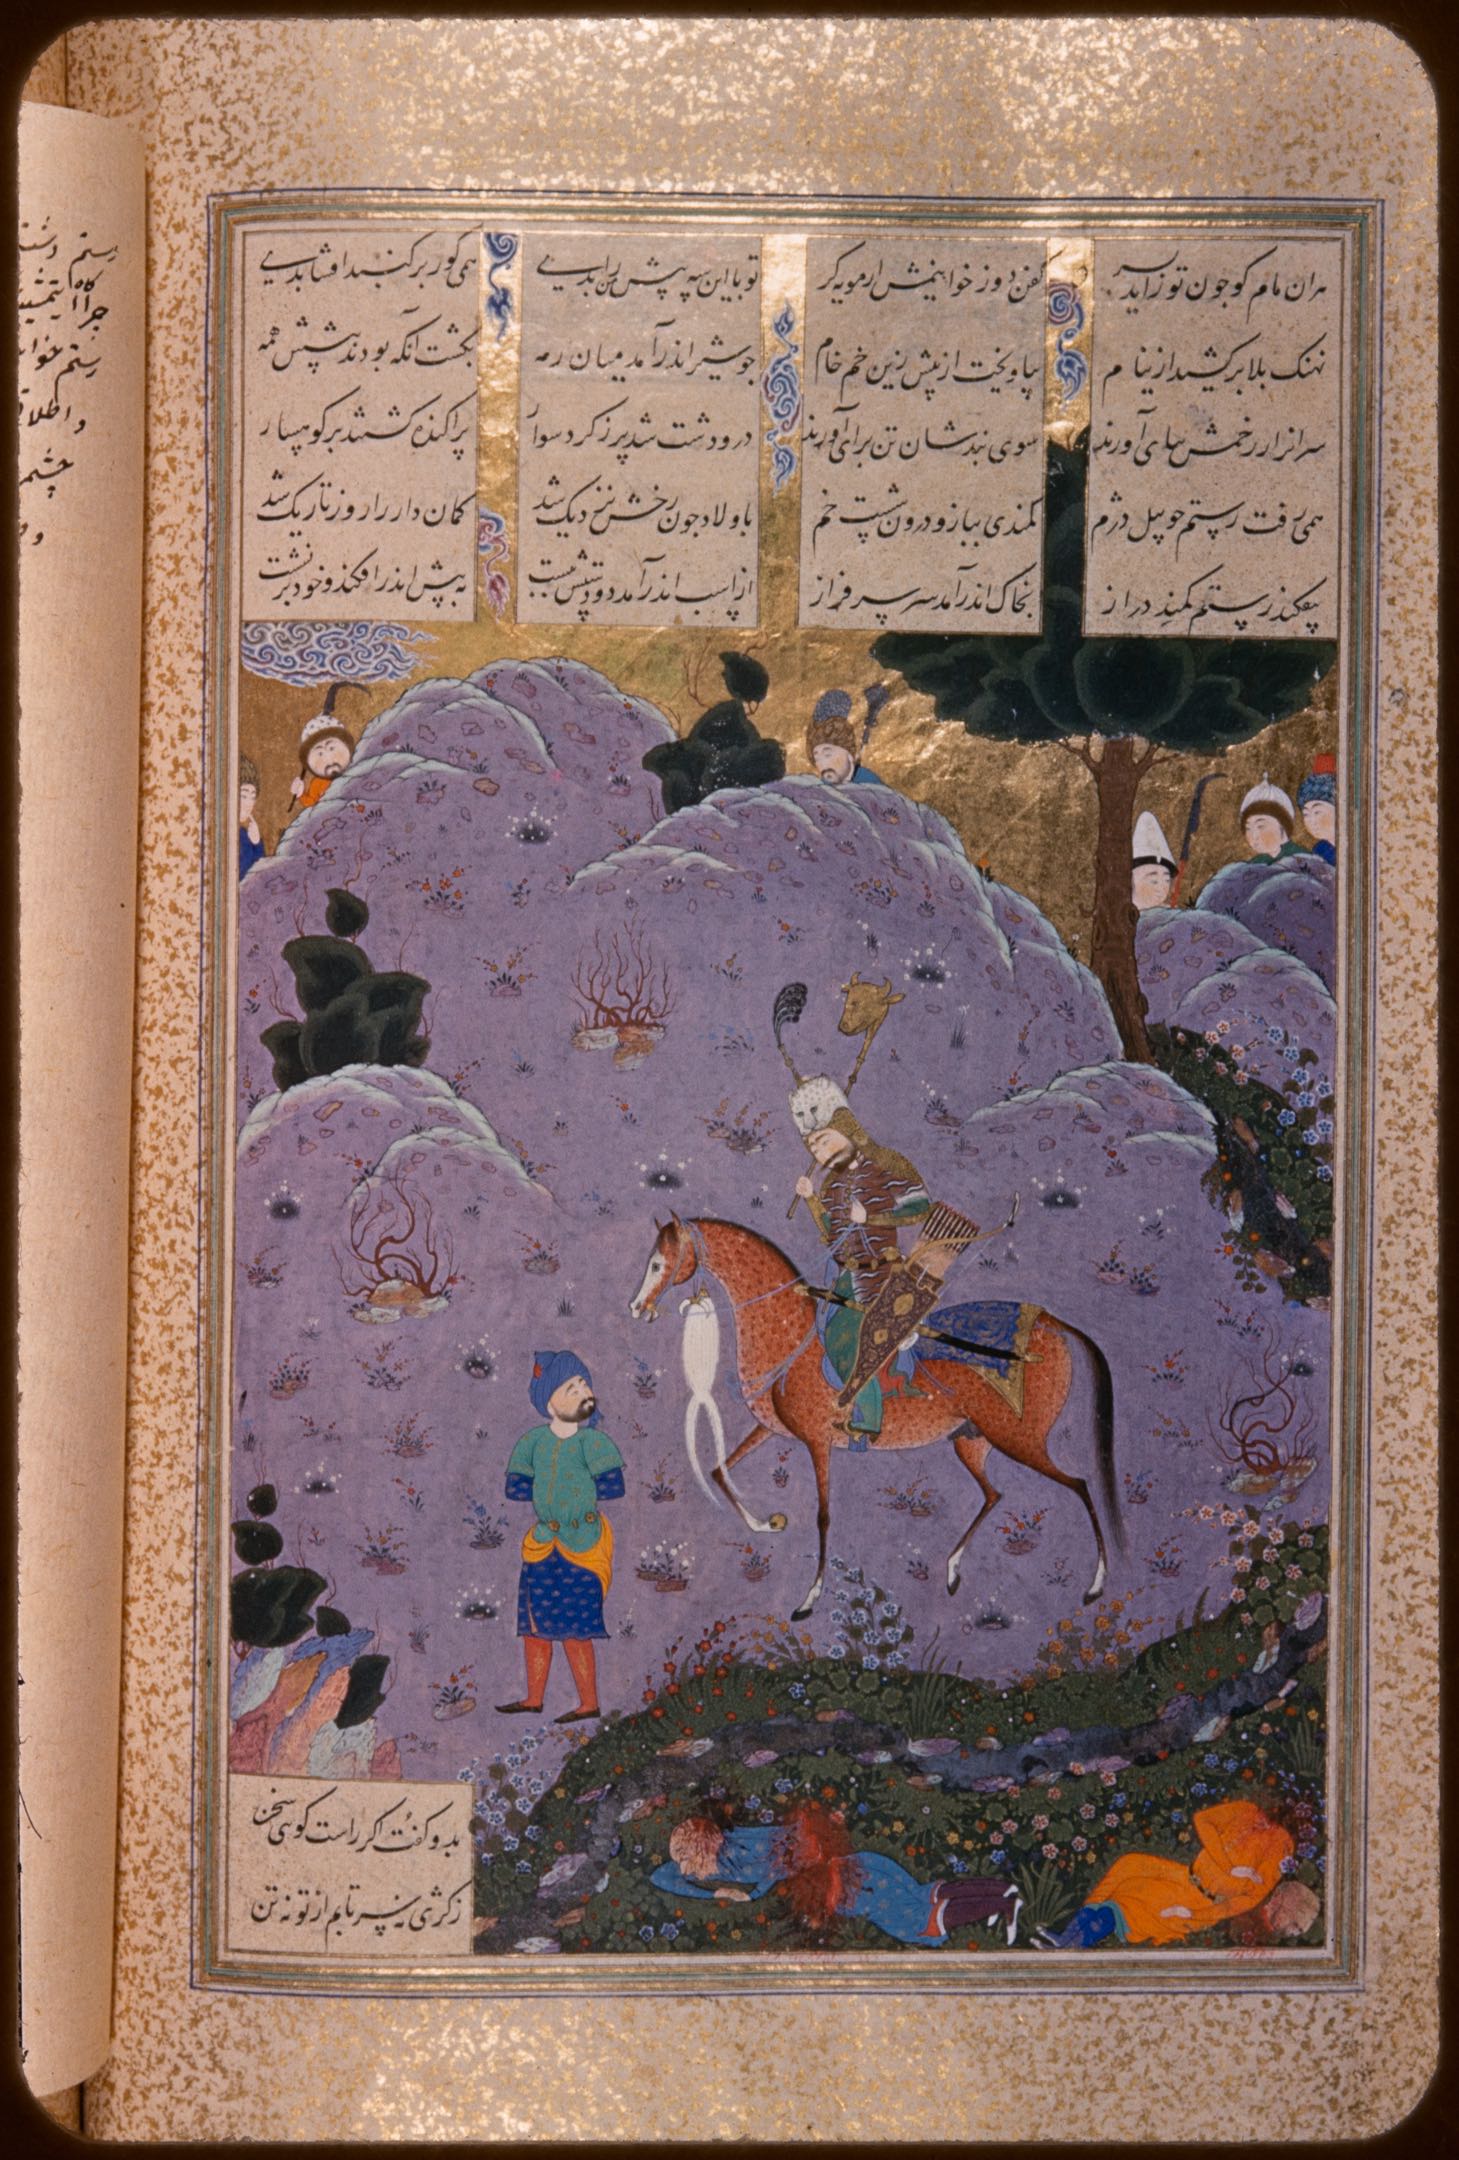 Rustam's Fifth Course: The Capture of Aulad (Tehran Museum of Contemporary Art), f. 121v from the Houghton Shahnama